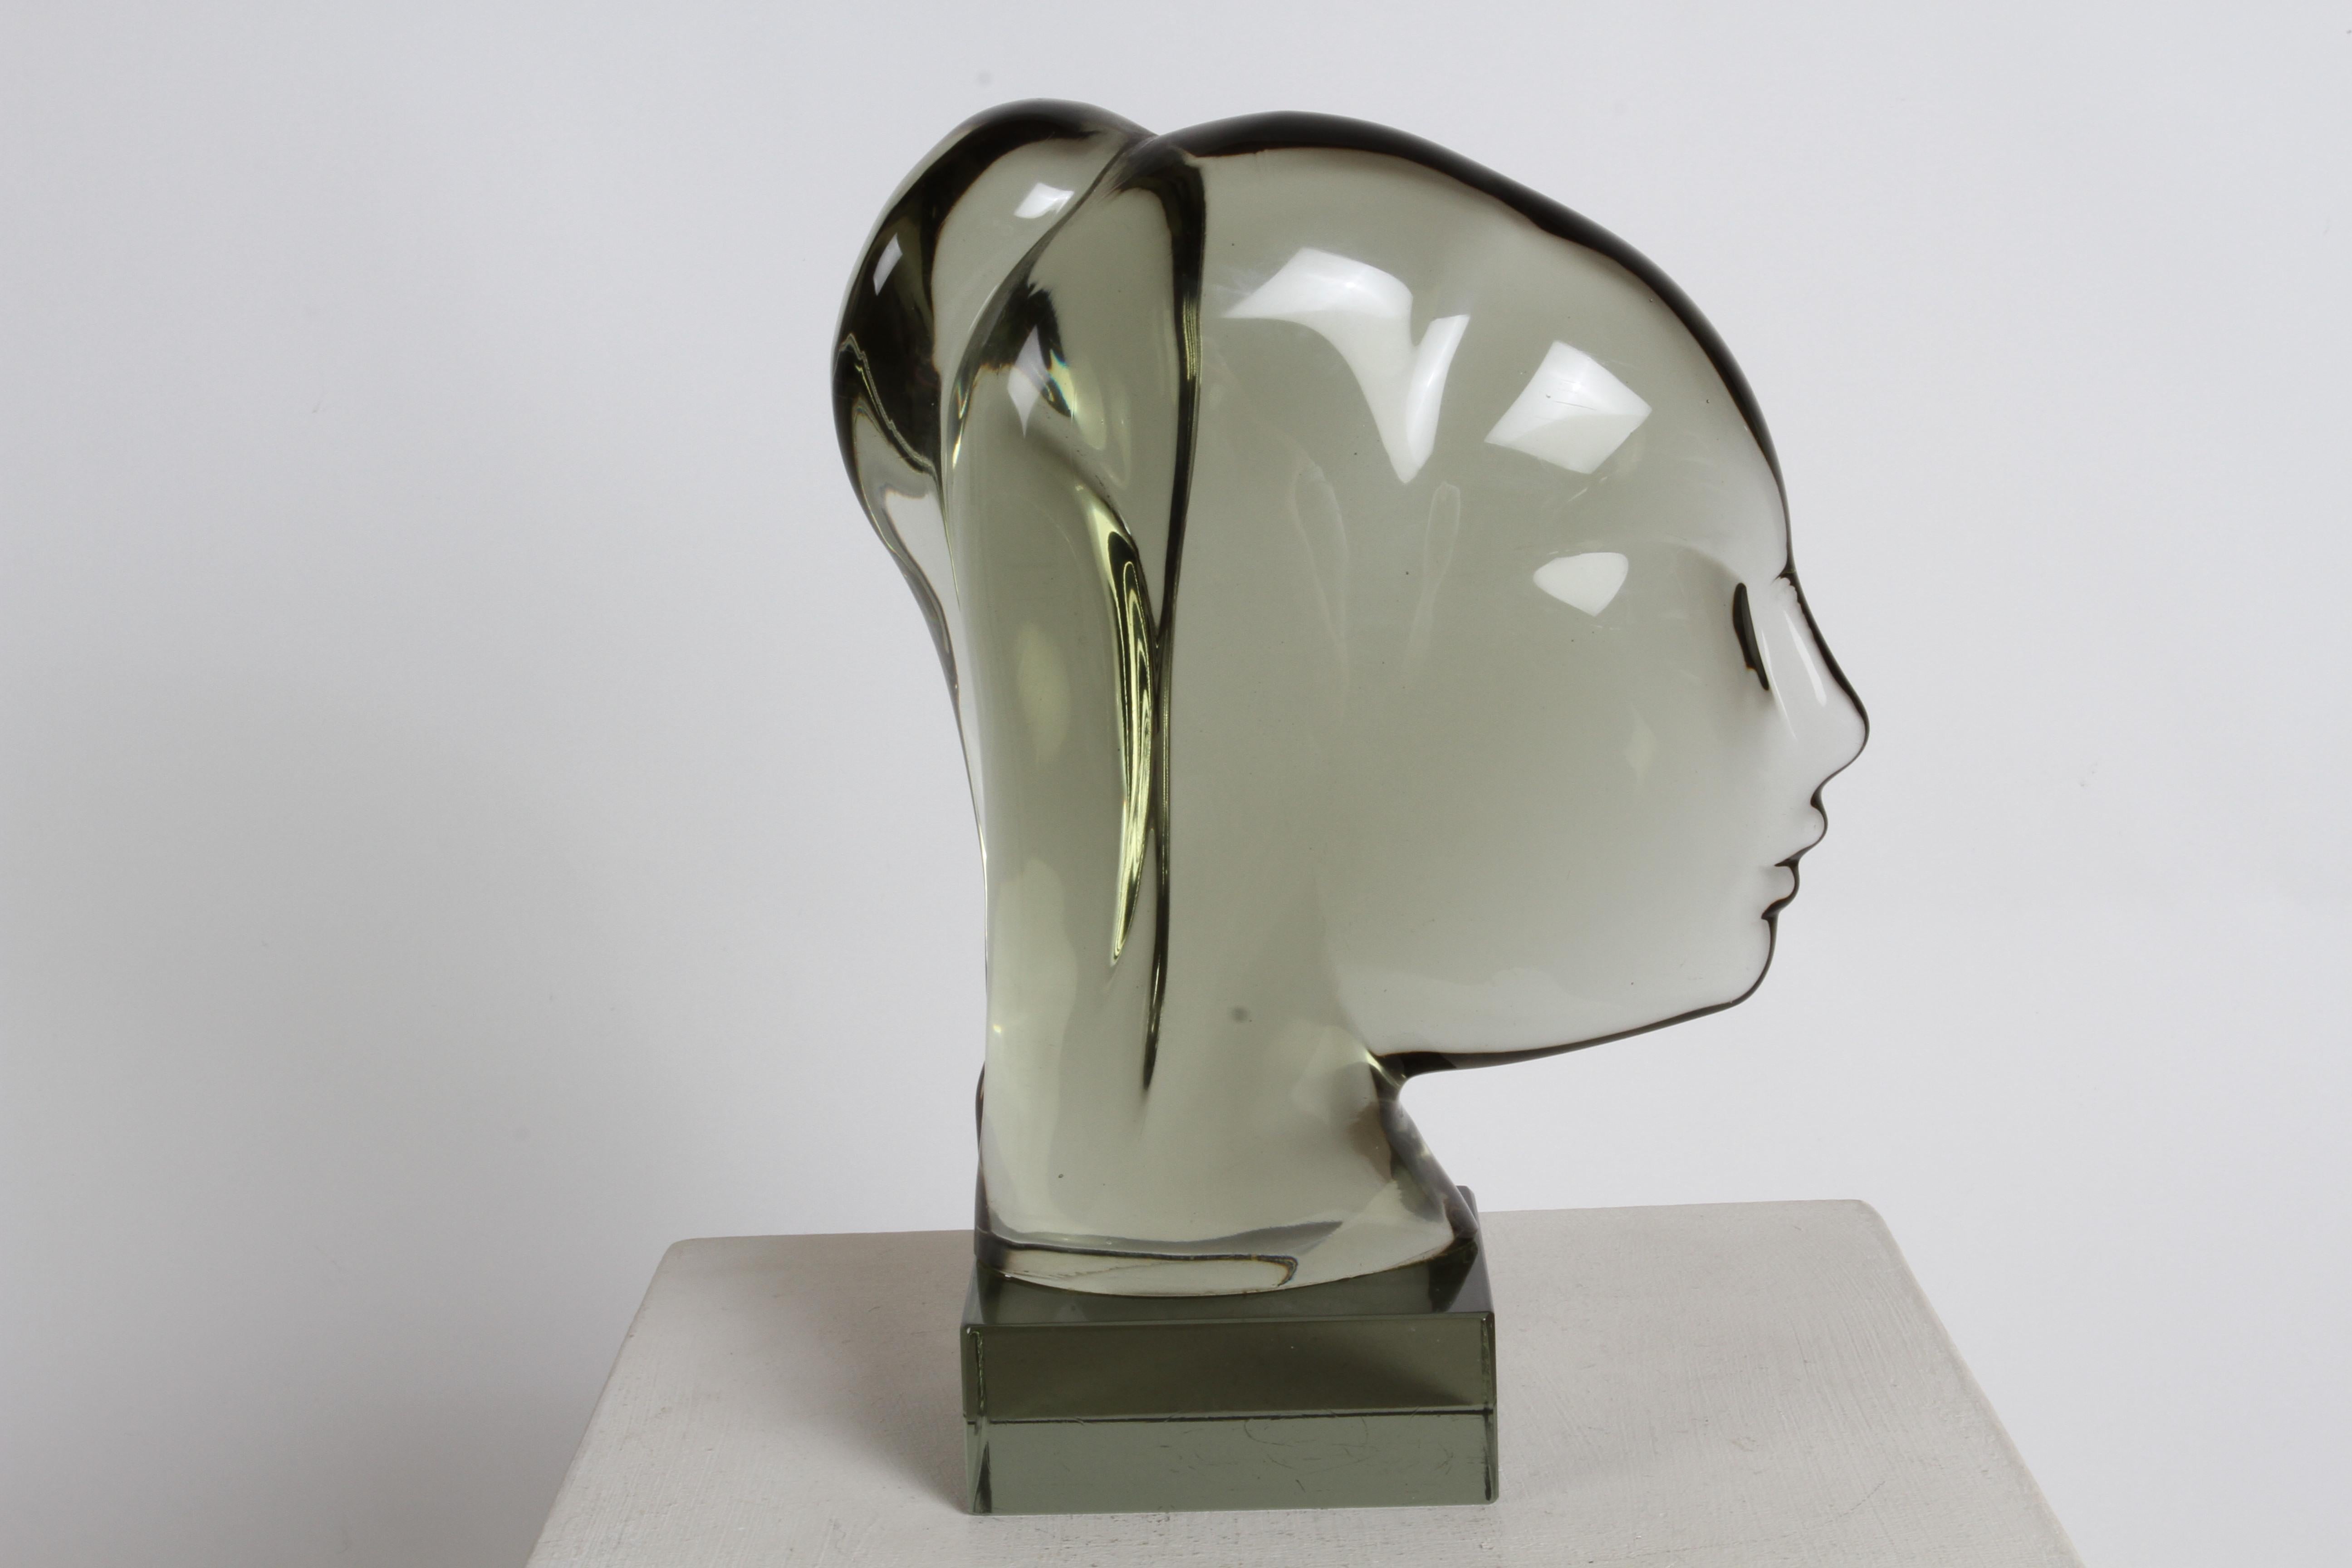 Master Italian Glass Artisan Ermanno Nason (1928-2013) created this smoked glass young female bust with ponytail sculpture in 1975. The only other example I found in my research was in his own gallery /museum, now temporary closed. Some minor